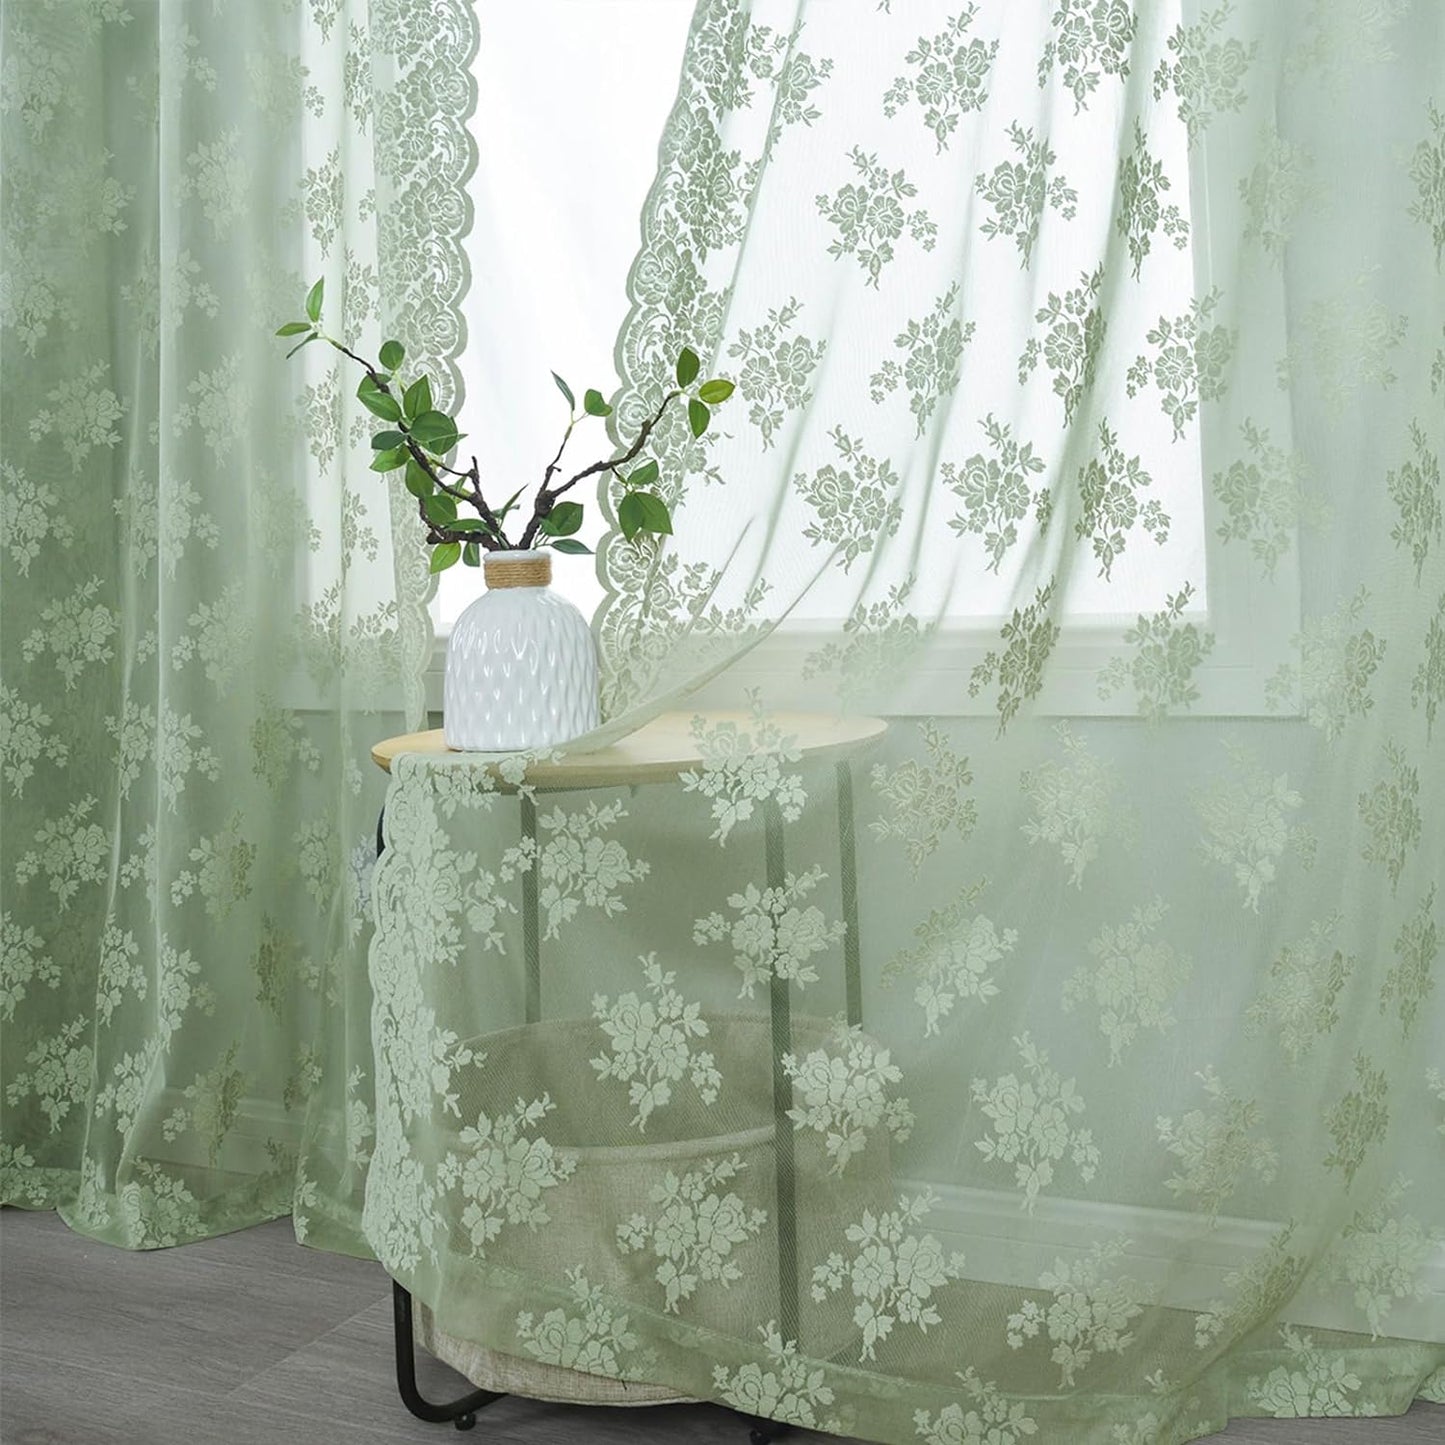 Kotile Sage Green Sheer Valance Curtain for Windows, Rustic Floral Spring Sheer Window Valance Curtain 18 Inch Length, Light Filtering Rod Pocket Lace Valance, 52 X 18 Inch, 1 Panel, Sage Green  Kotile Textile Green 52 In X 63 In Grommet 